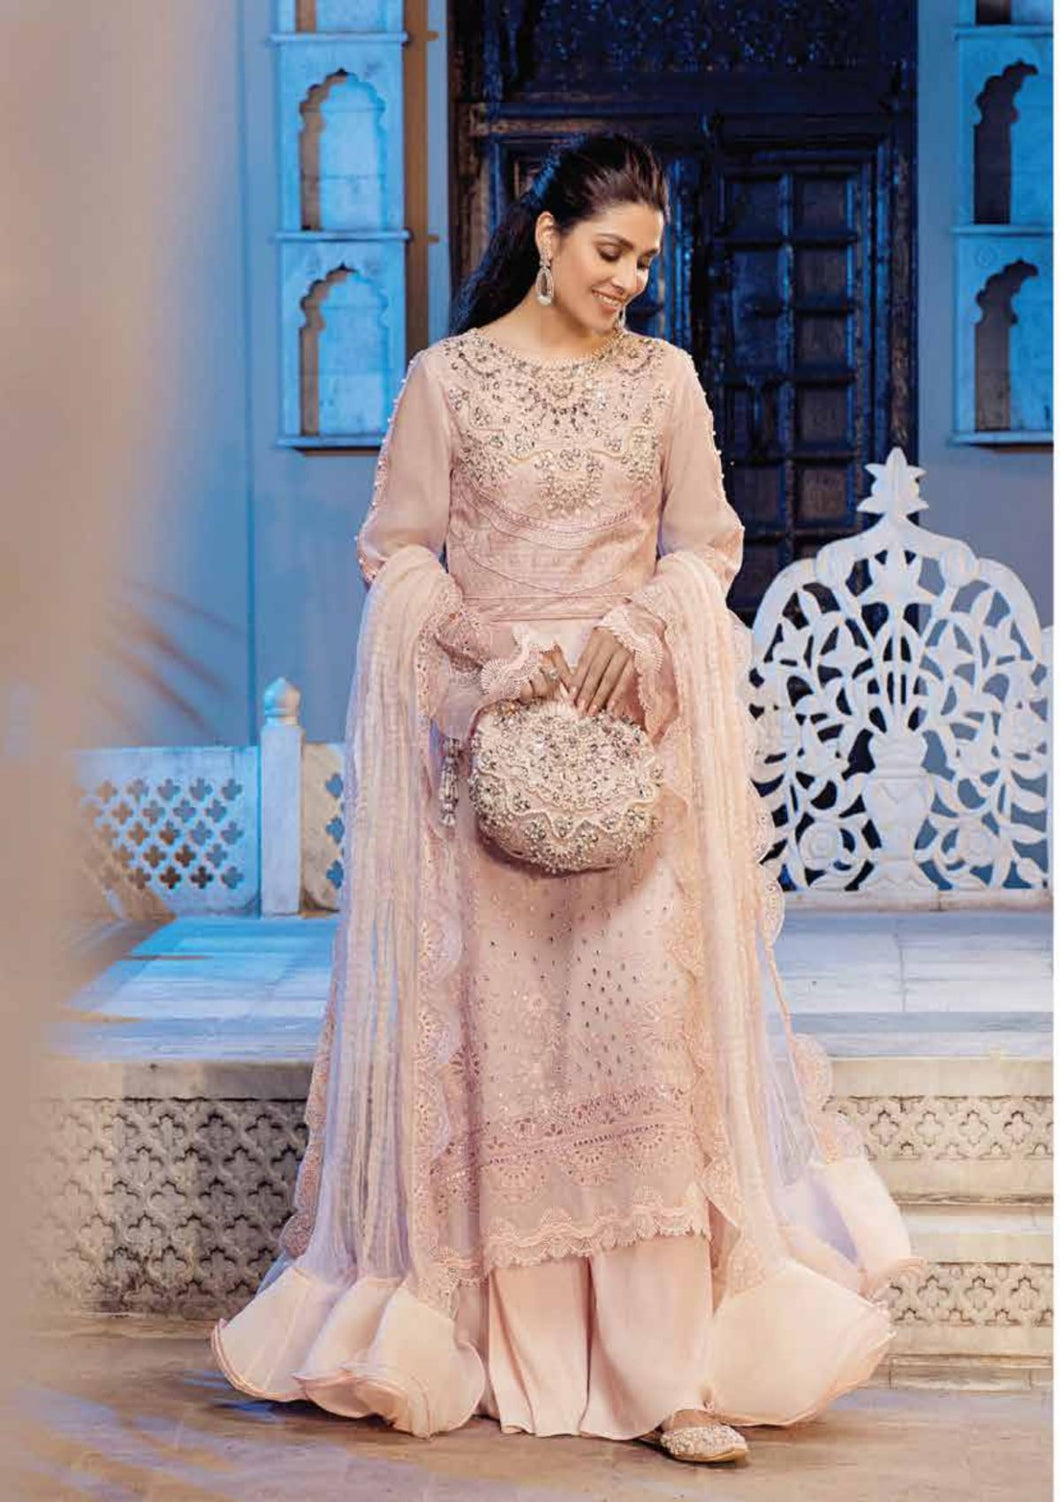 Mushq Dastaan Chikankari 2021 - NISSA | 07 Peach Chikankari dress is exclusively available on lebasonline. We have largest varieties of Pakistani Designer Dress in UK of various brand such as Mushq 2021. The dresses are customized as Pakistani bridal dress in USA. Get your dress in UK USA from lebaasonline!